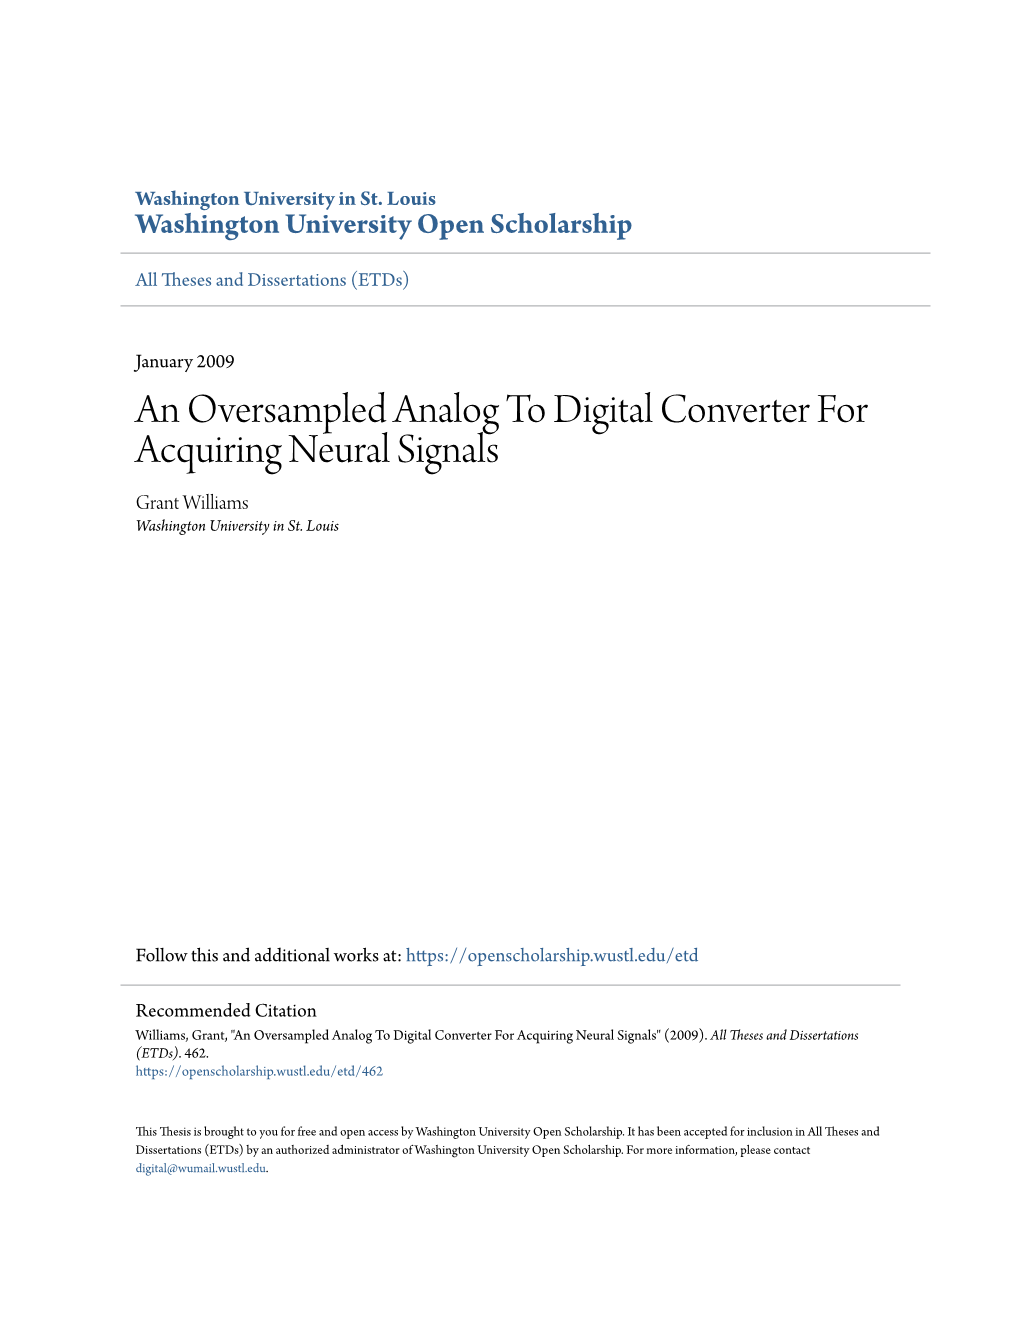 An Oversampled Analog to Digital Converter for Acquiring Neural Signals Grant Williams Washington University in St